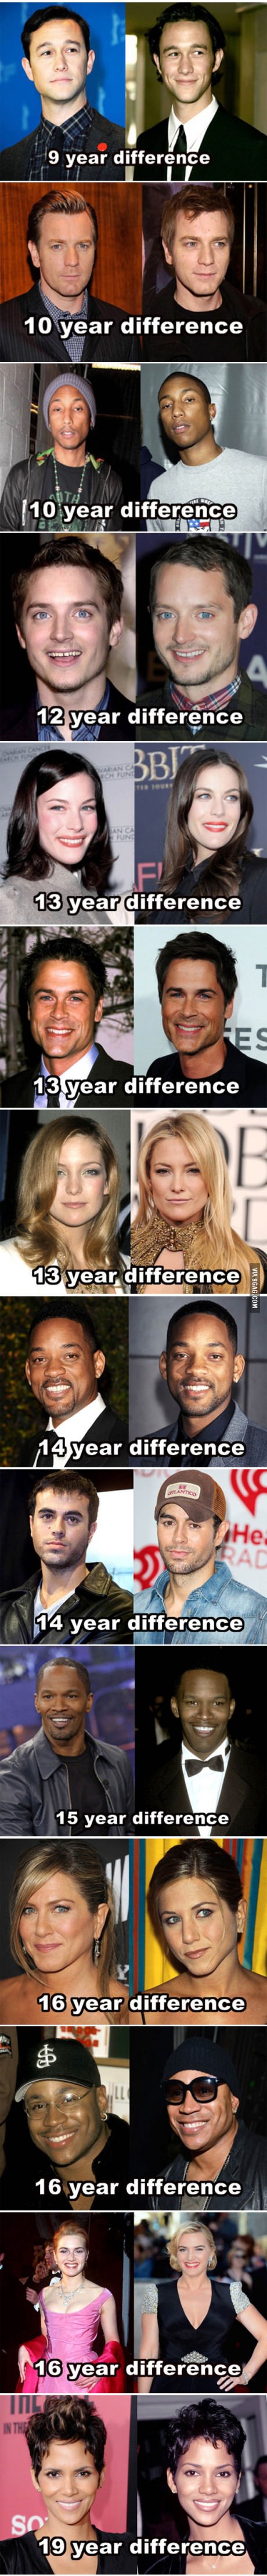 actors, actresses, celebrities, difference 10 years, aging, before after, then and now